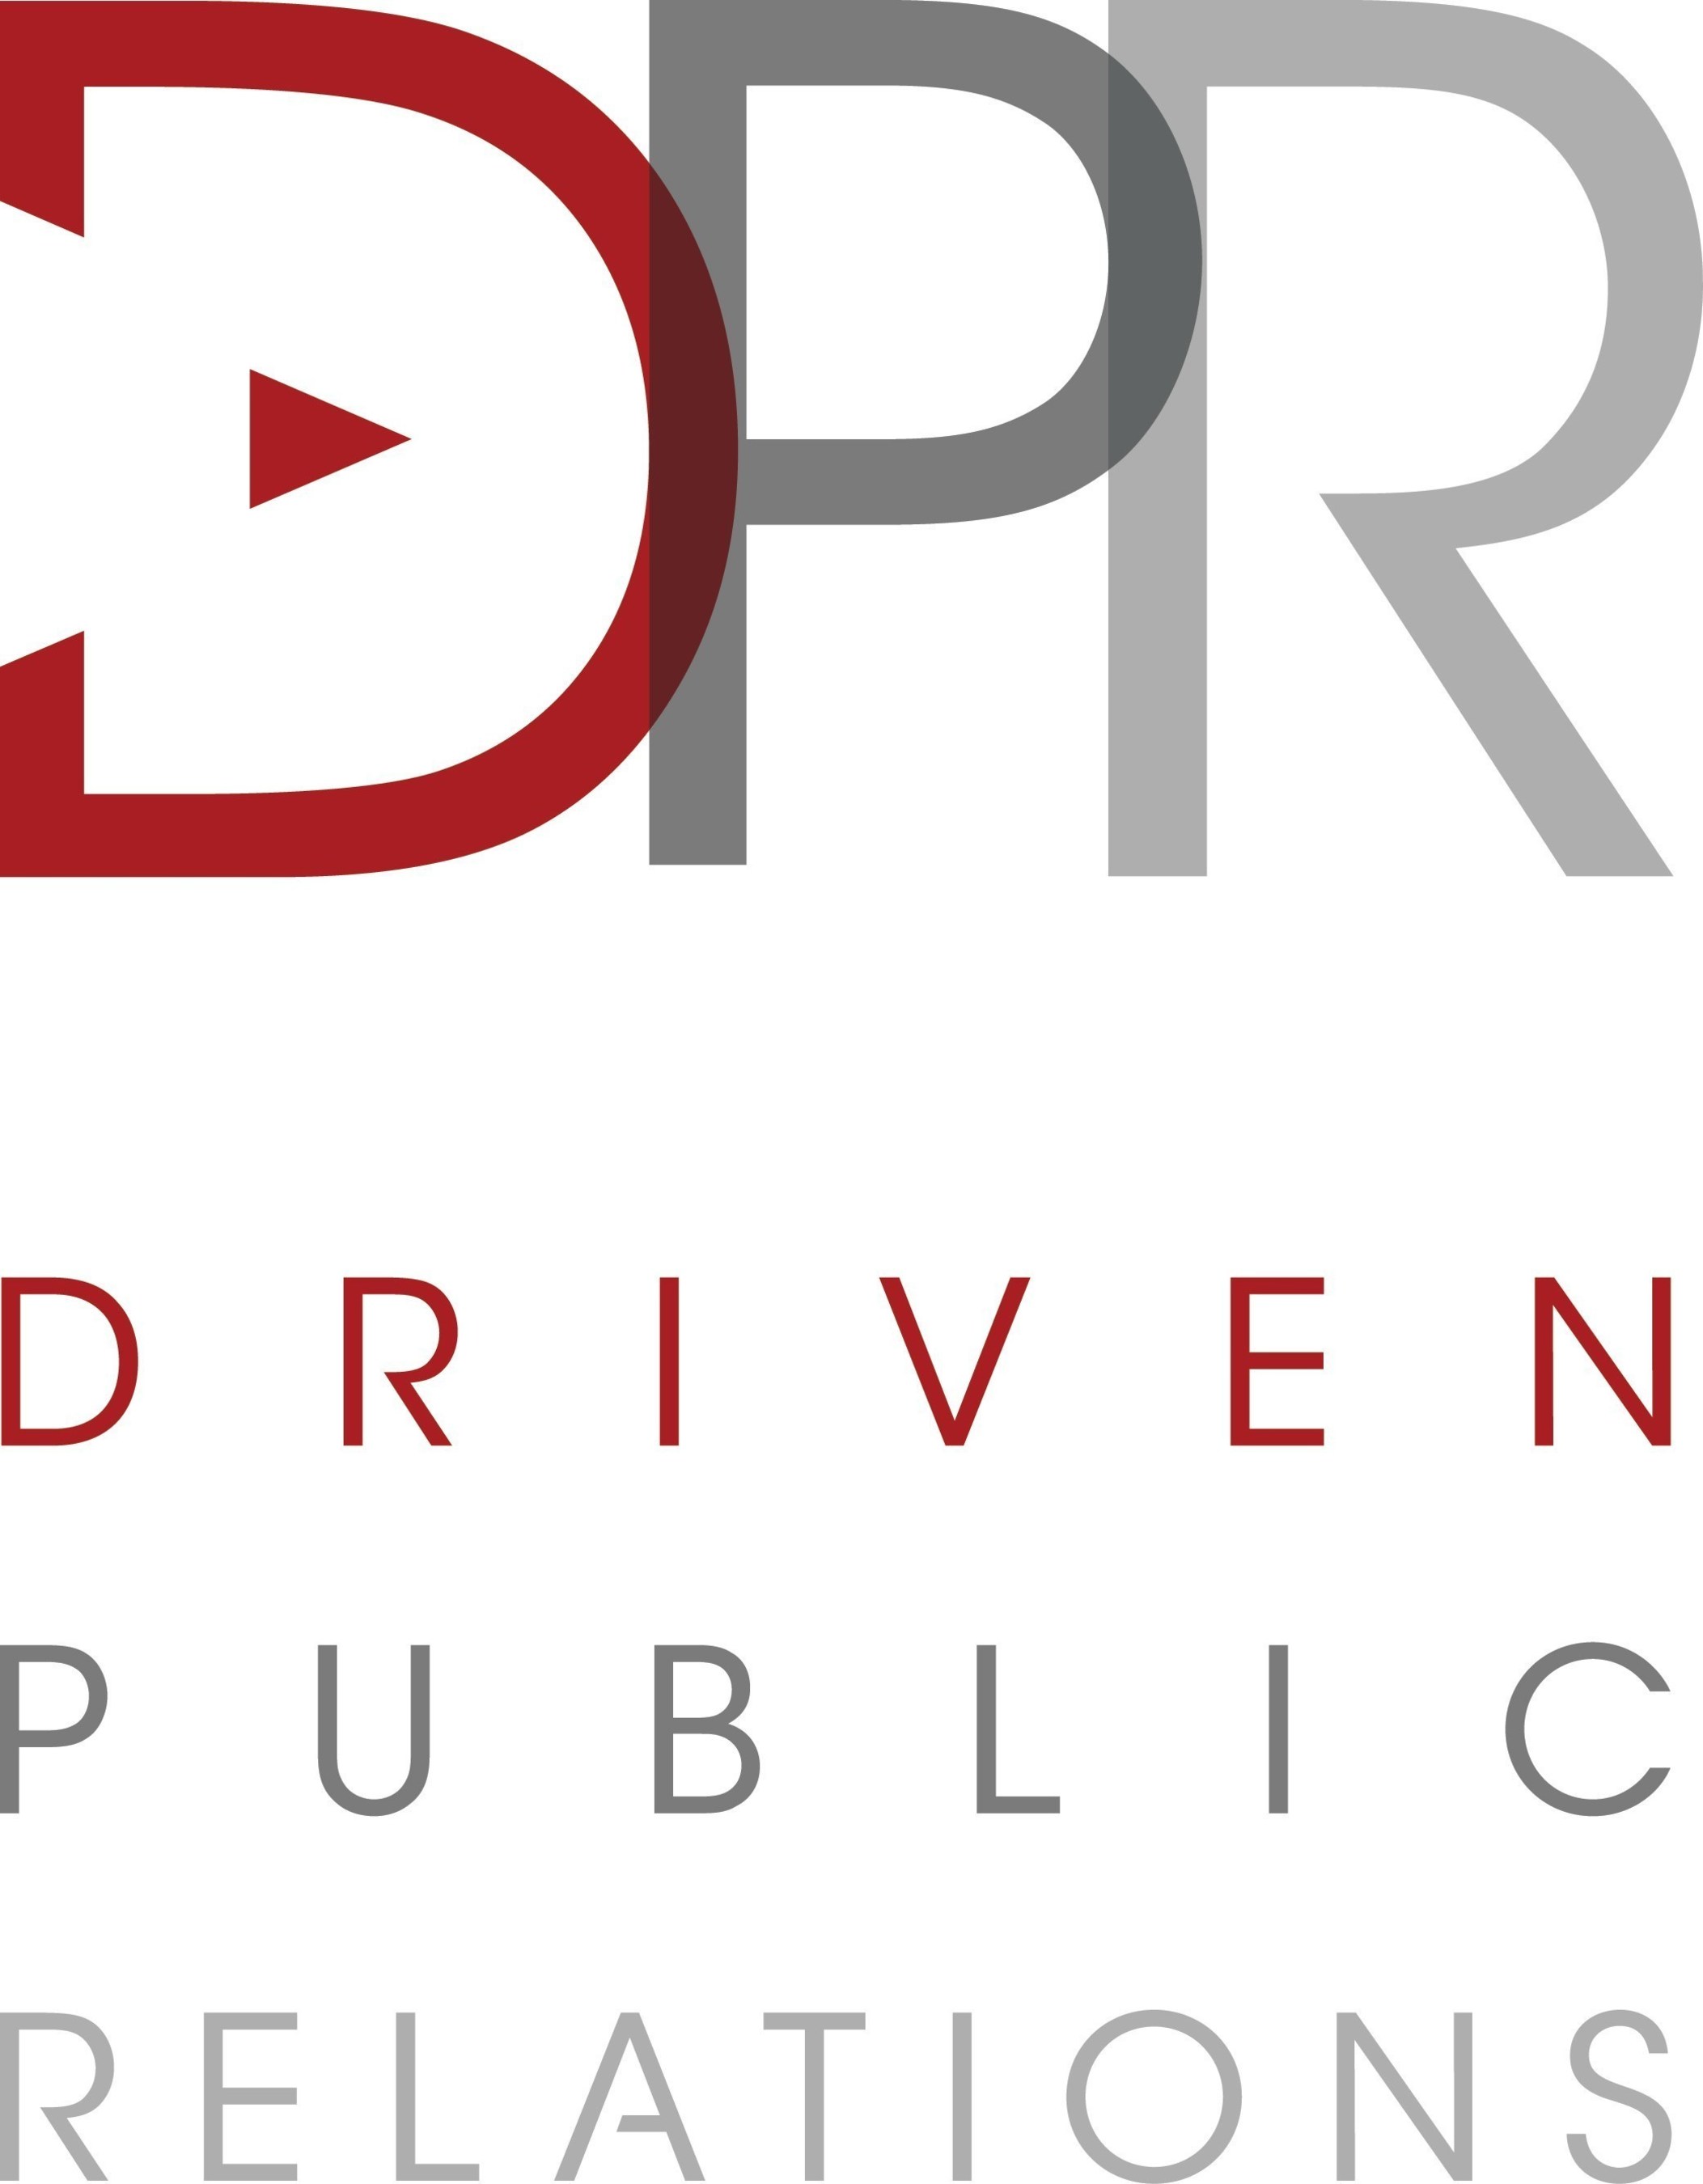 DRIVEN Public Relations is a Southern California based communications and marketing agency with its headquarters in Orange County (Costa Mesa) and satellite offices in Temecula, Calif., Phoenix, and New York. DRIVEN PR delivers high-impact and targeted media campaigns for the automotive, motorcycle, fashion, spirits, health & fitness, healthcare, technology and green/sustainability industries. DRIVEN's core competencies include brand building, media relations, strategic counsel, executive visibility, event management, press material development, advertising, media planning, trade show support and product launches. For more information, visit www.drivenpublicrelations.com. Follow them on Facebook at www.Facebook.com/DRIVENPR, on Twitter @driven_PR and on Instagram @driven_PR.